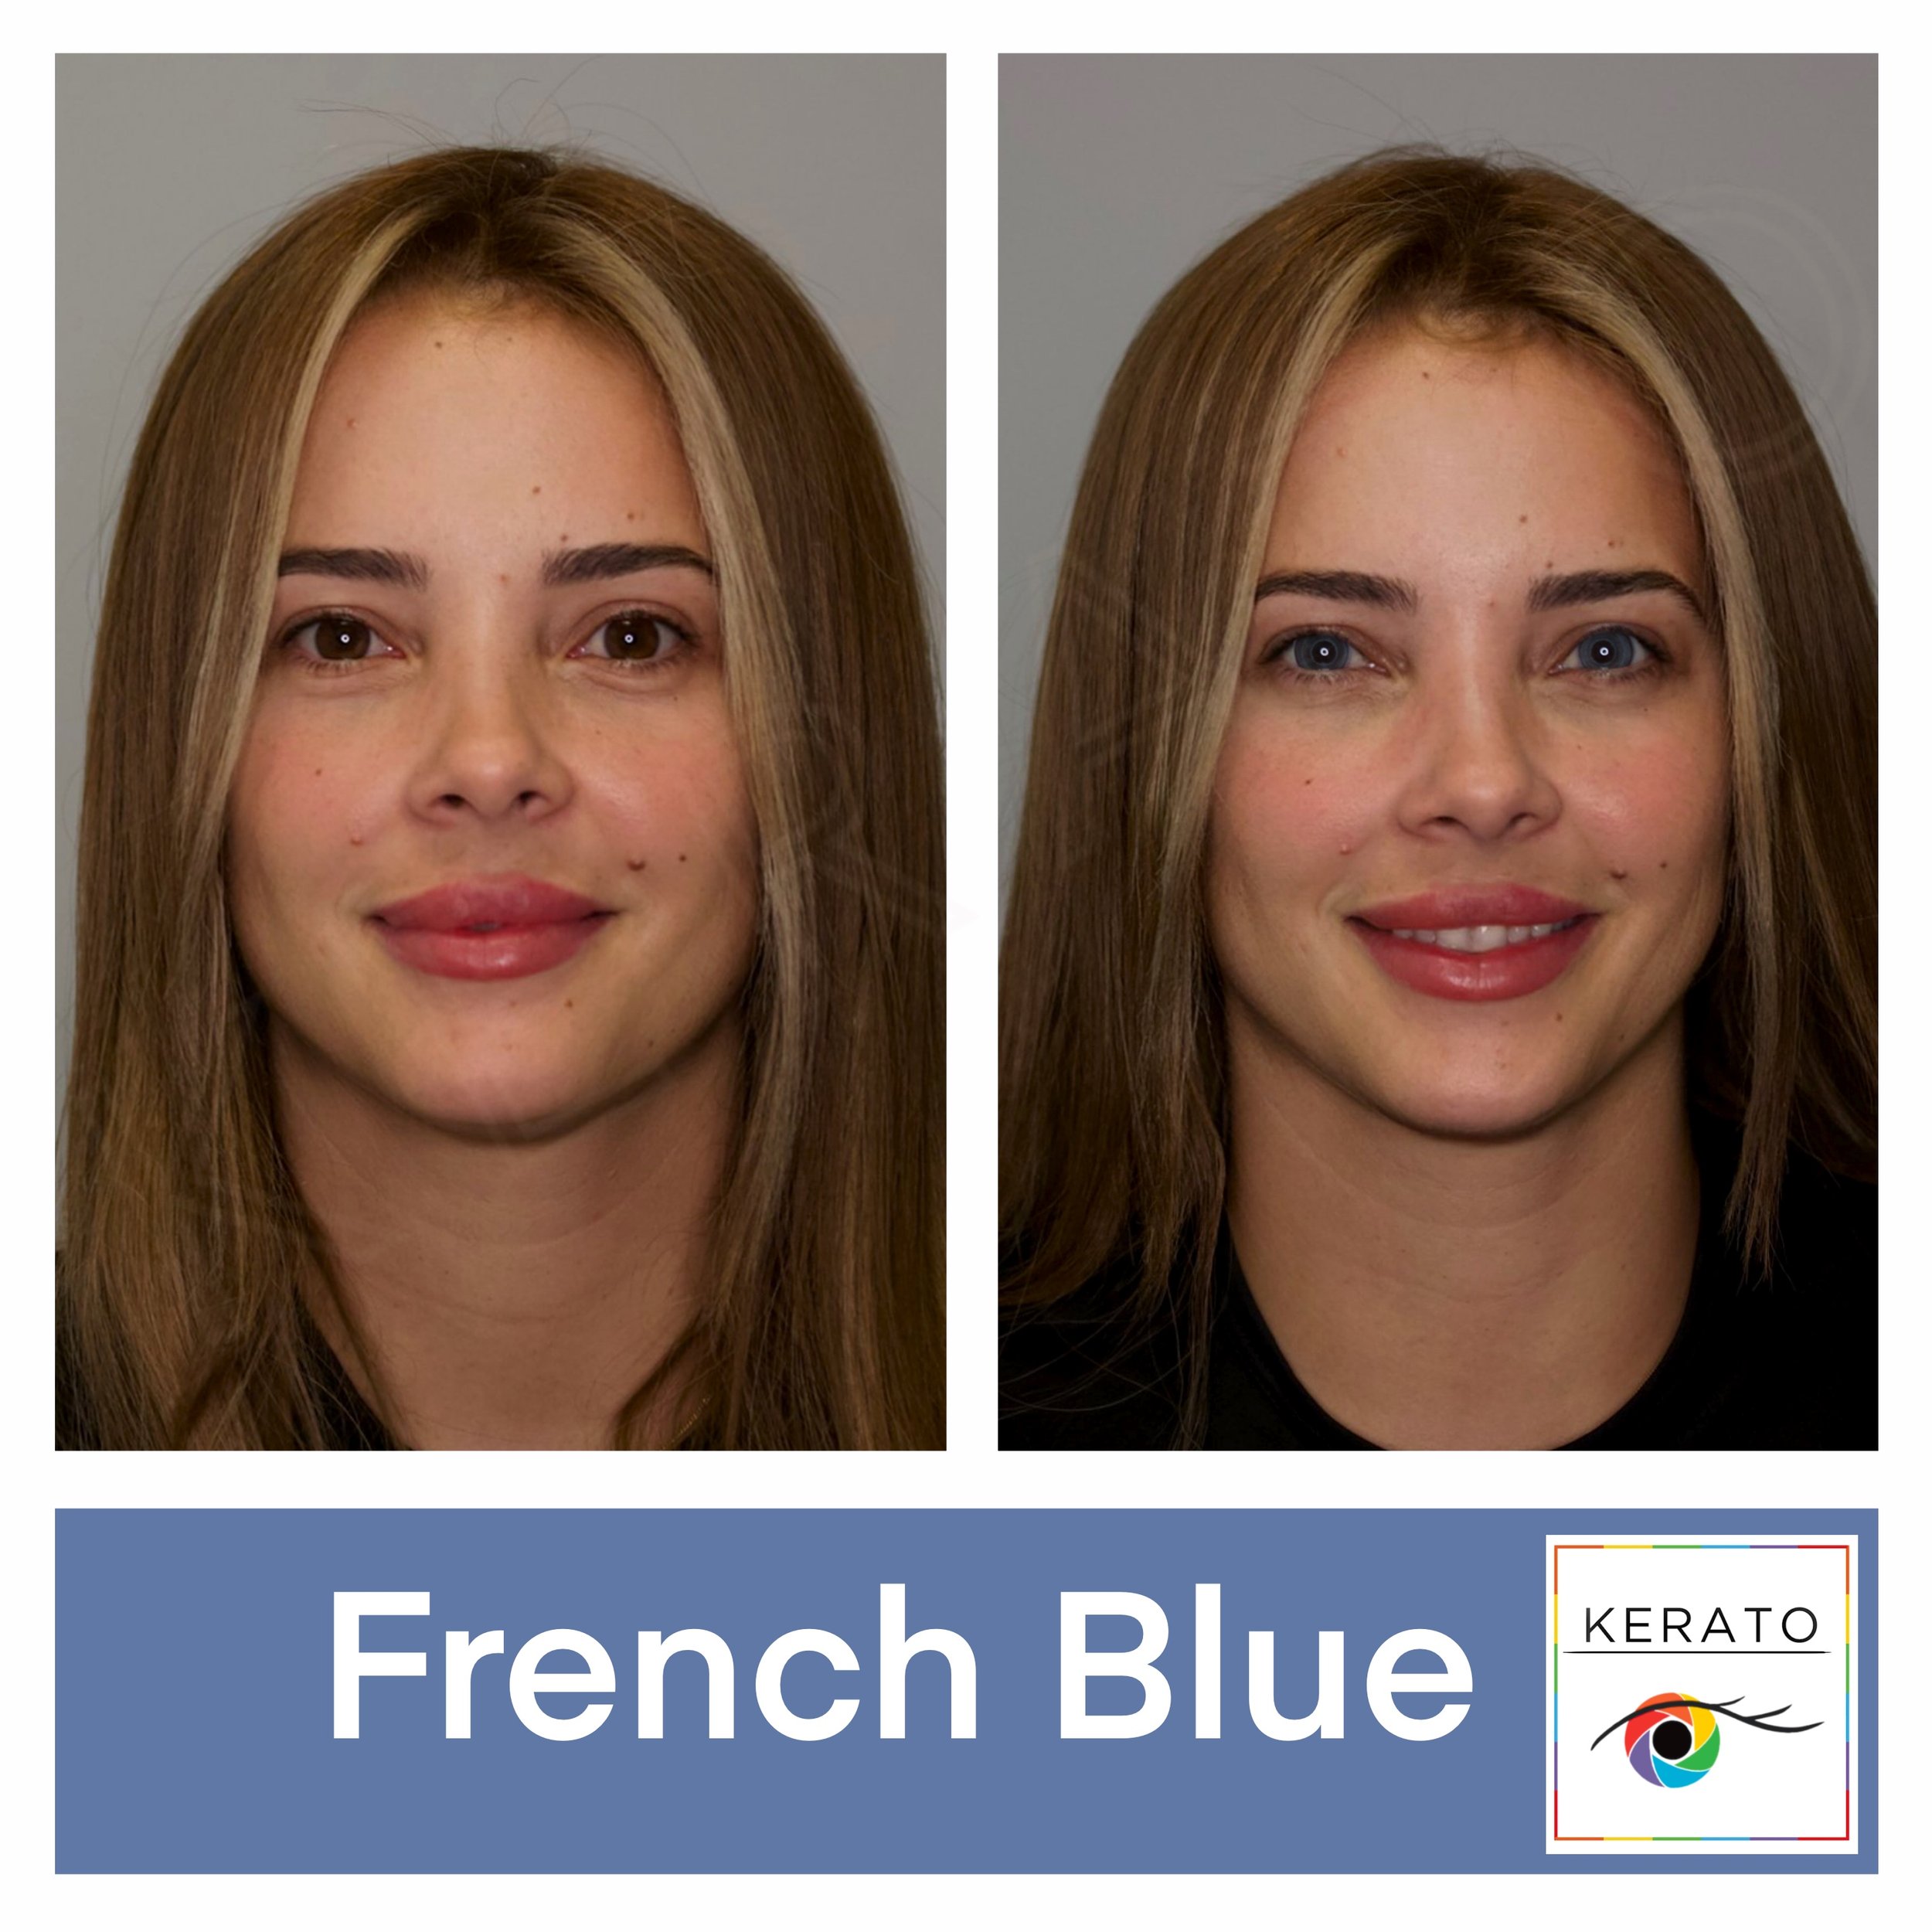 Eye Color Change with French Blue Pigment at KERATO